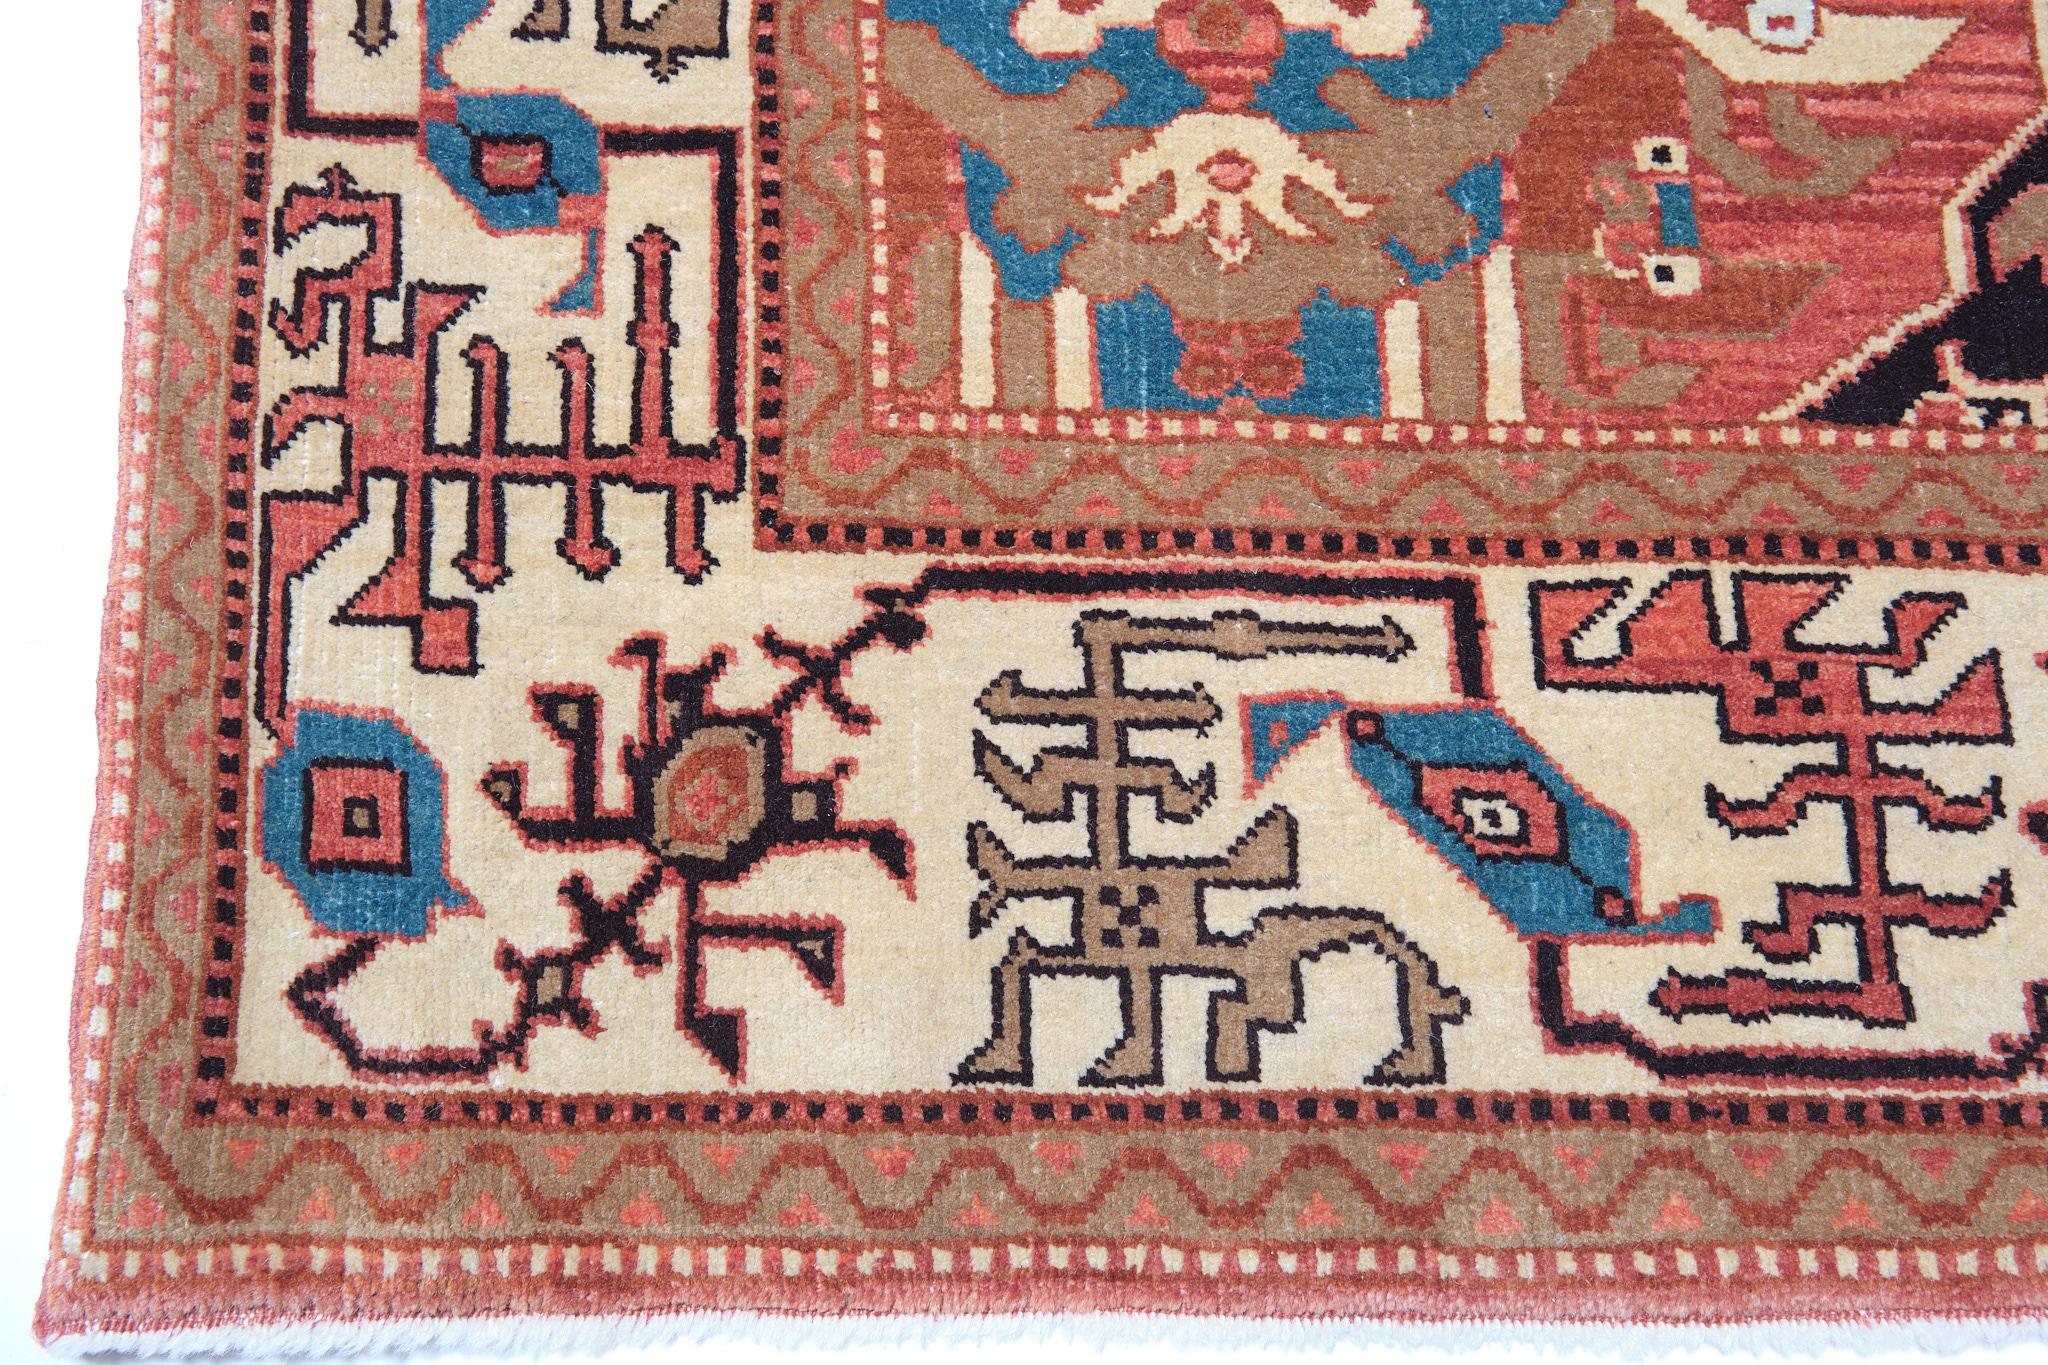 The source of the rug comes from the book Caucasian Carpets, E. Gans-Reudin, Thames and Hudson, Switzerland 1986, pg.37. This luxurious and varied work is known as the Cassirer dragon rug’ from the name of its previous owner. It is examined in great